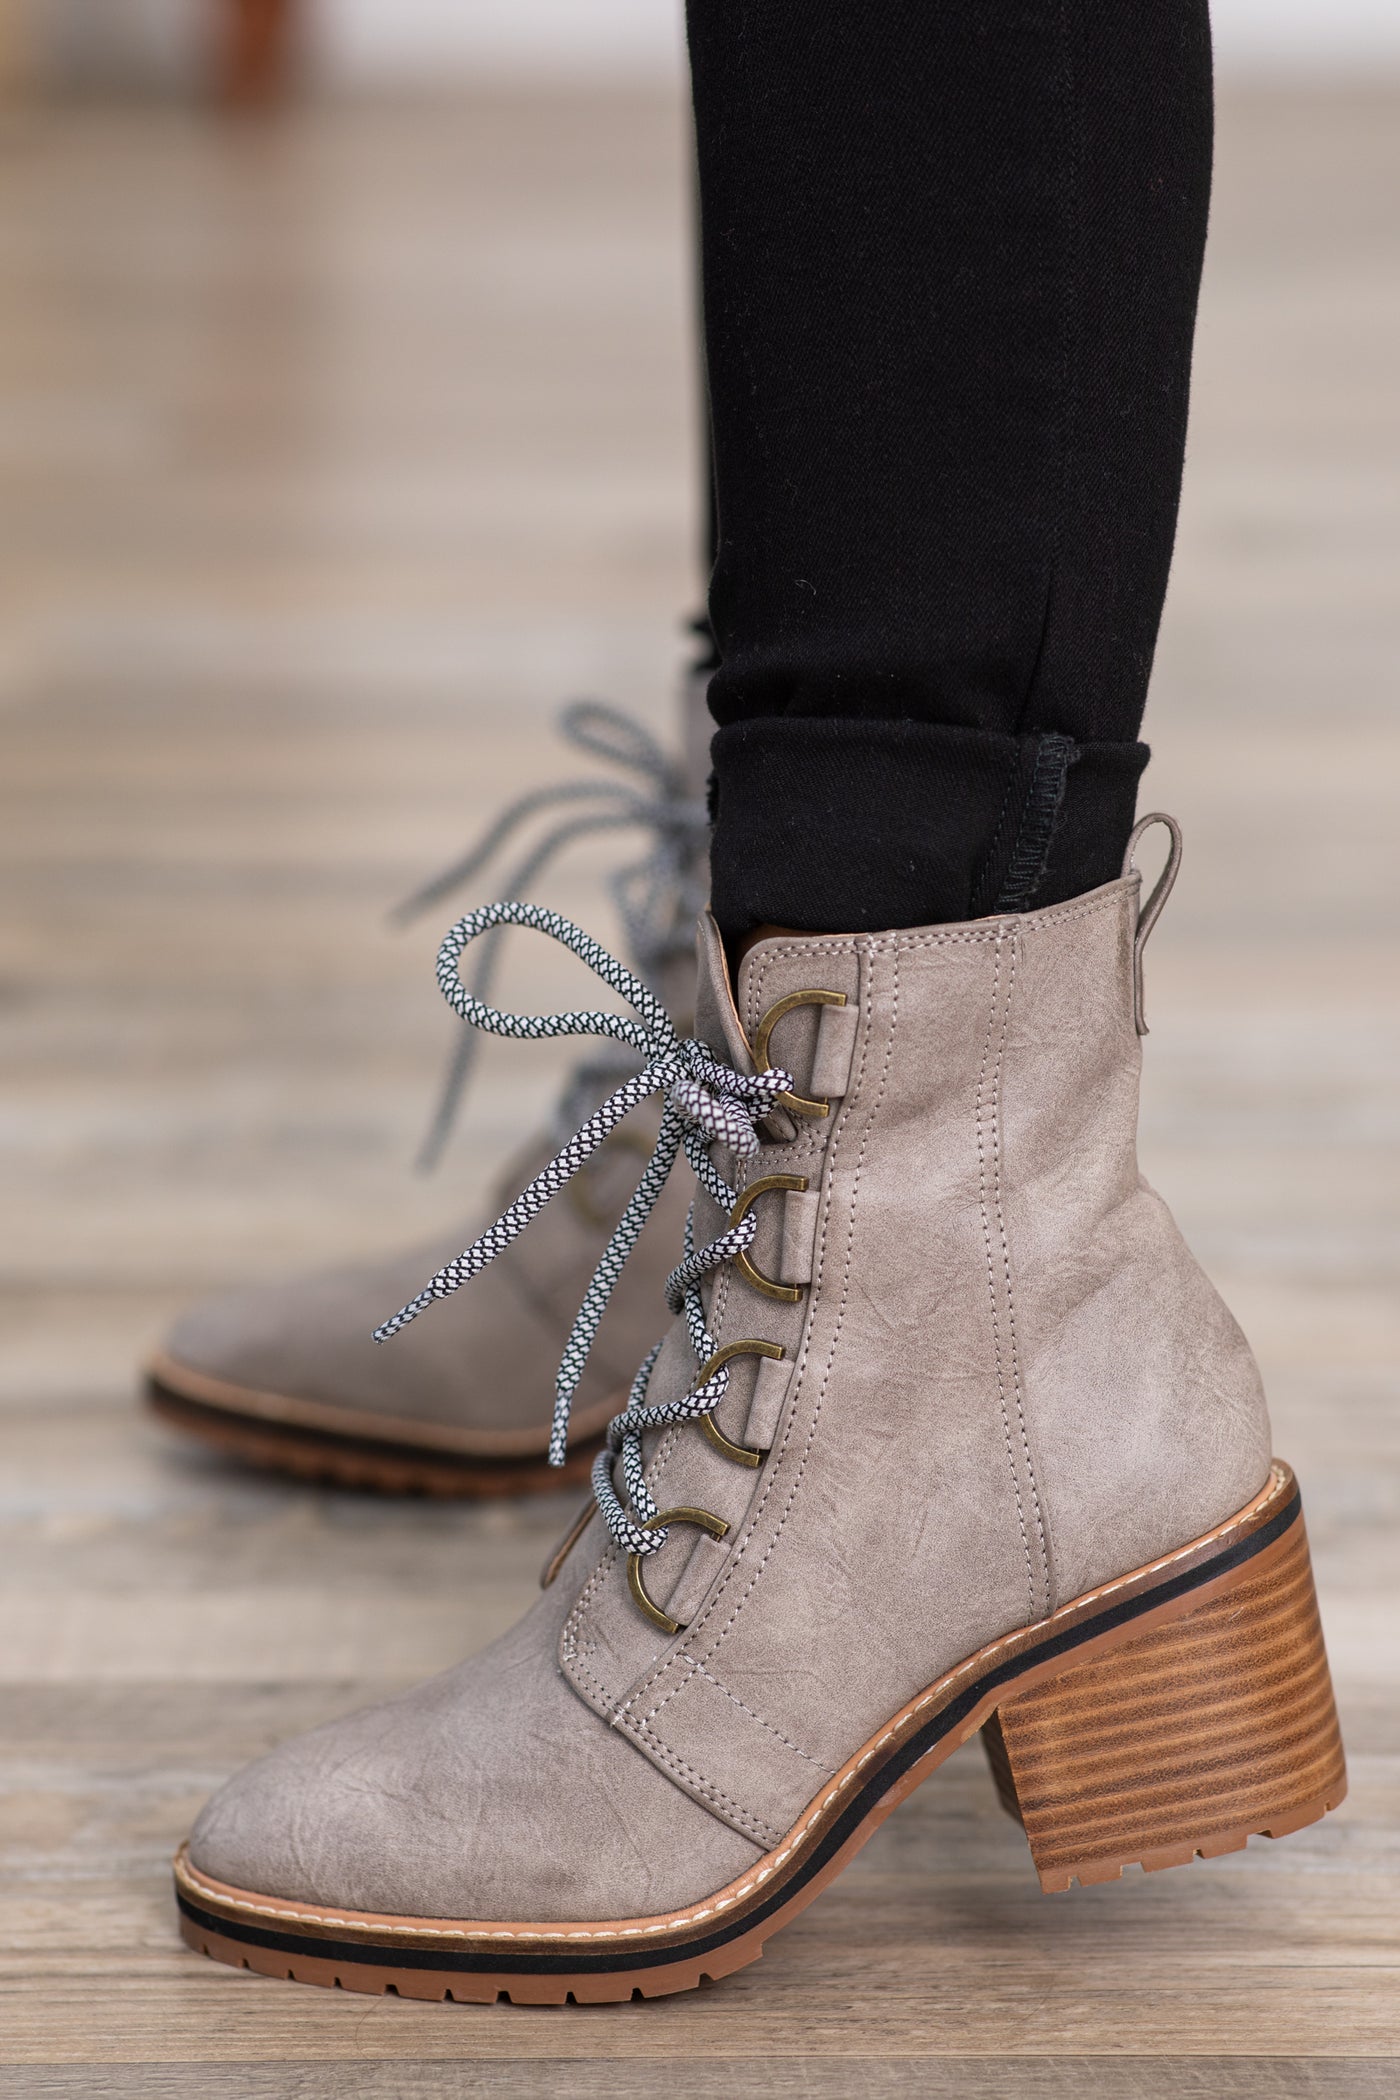 Grey Lace Up Boots With Block Heel